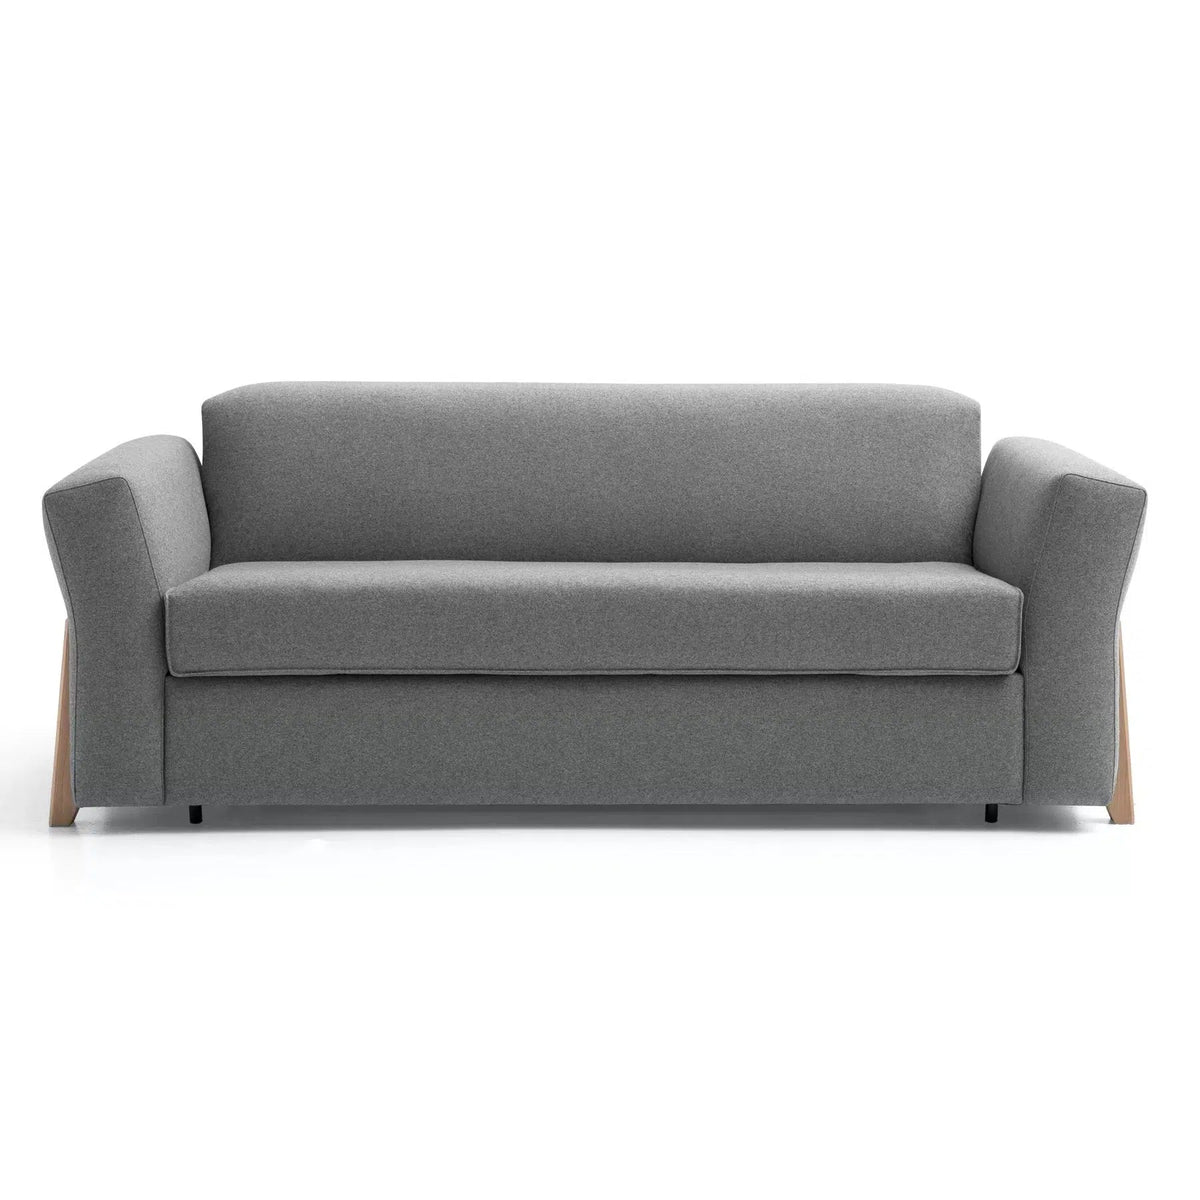 Perseo 941 Sofa Bed-TM Leader-Contract Furniture Store